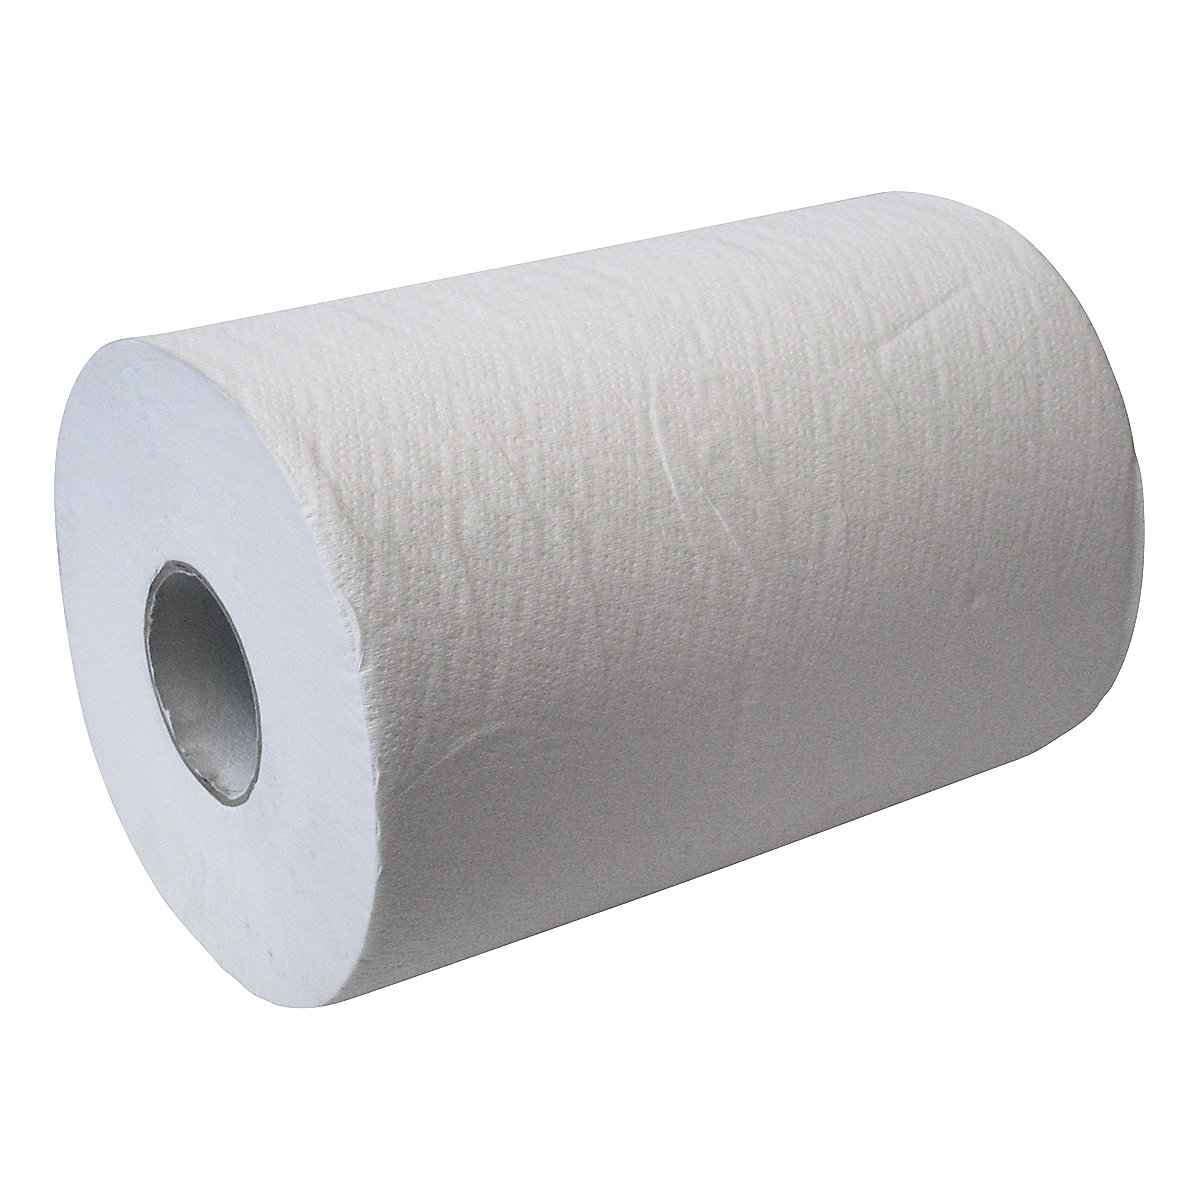 Roll of paper towels – CWS